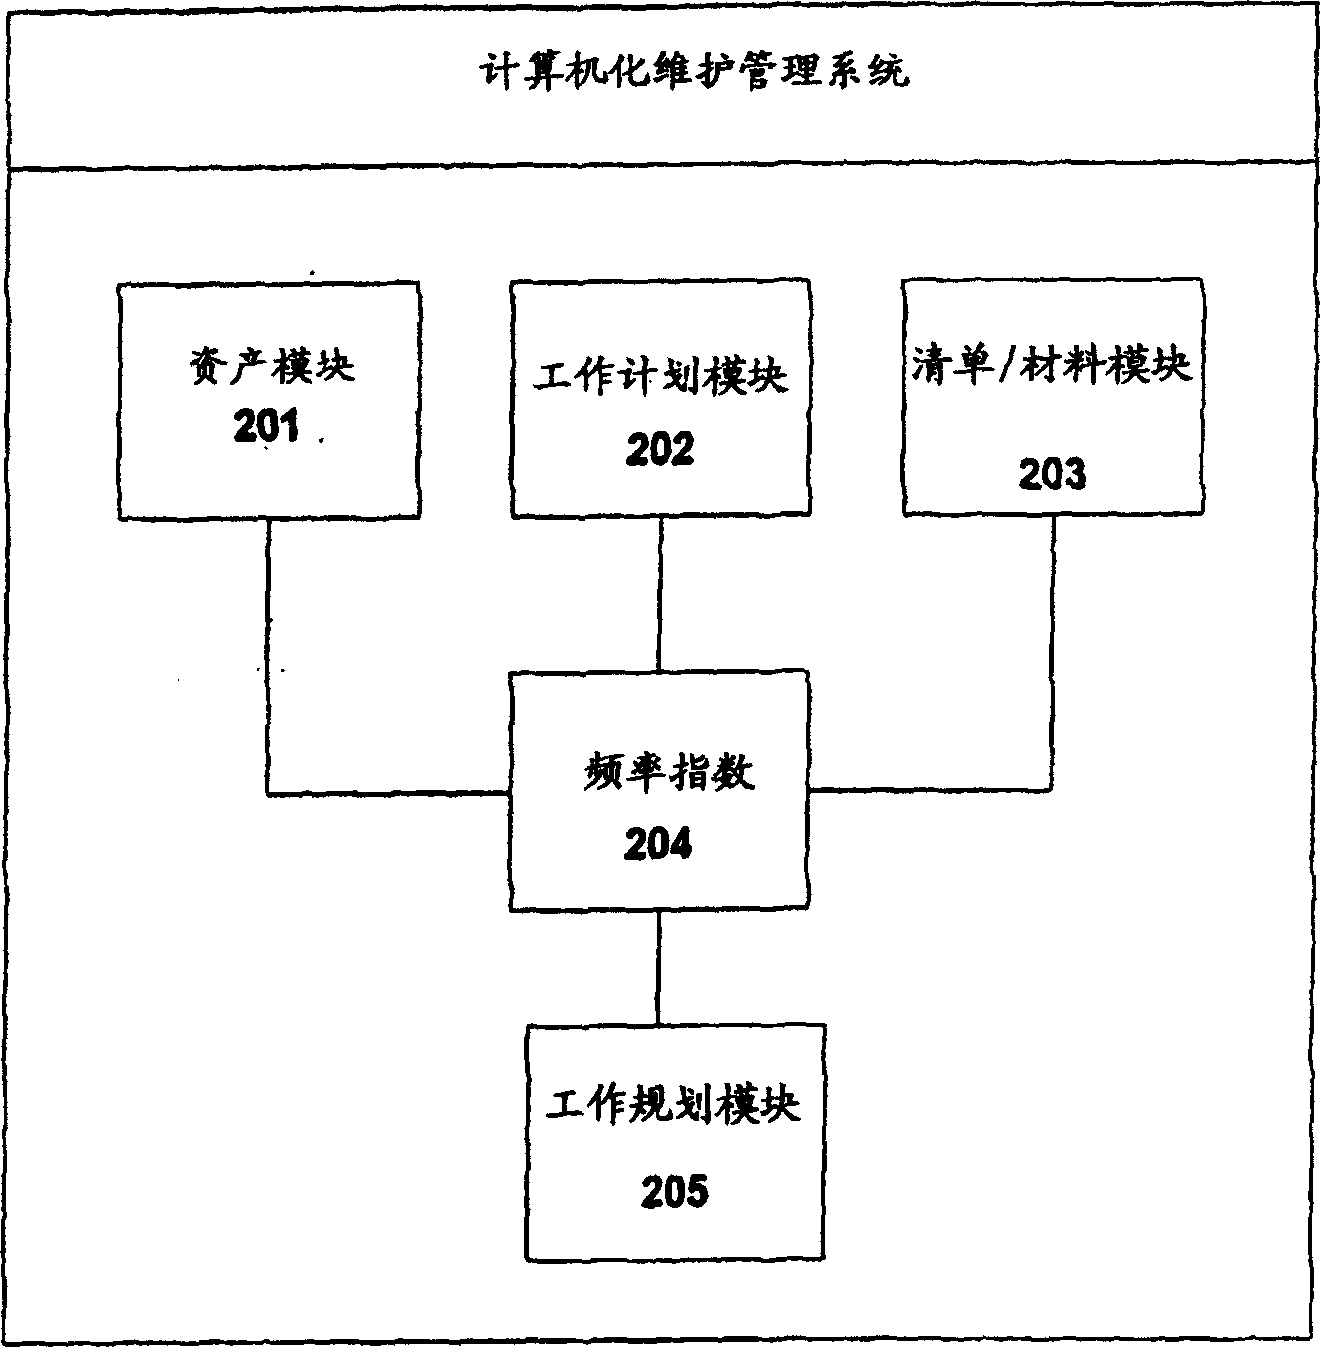 Maintenance and inspection system and method